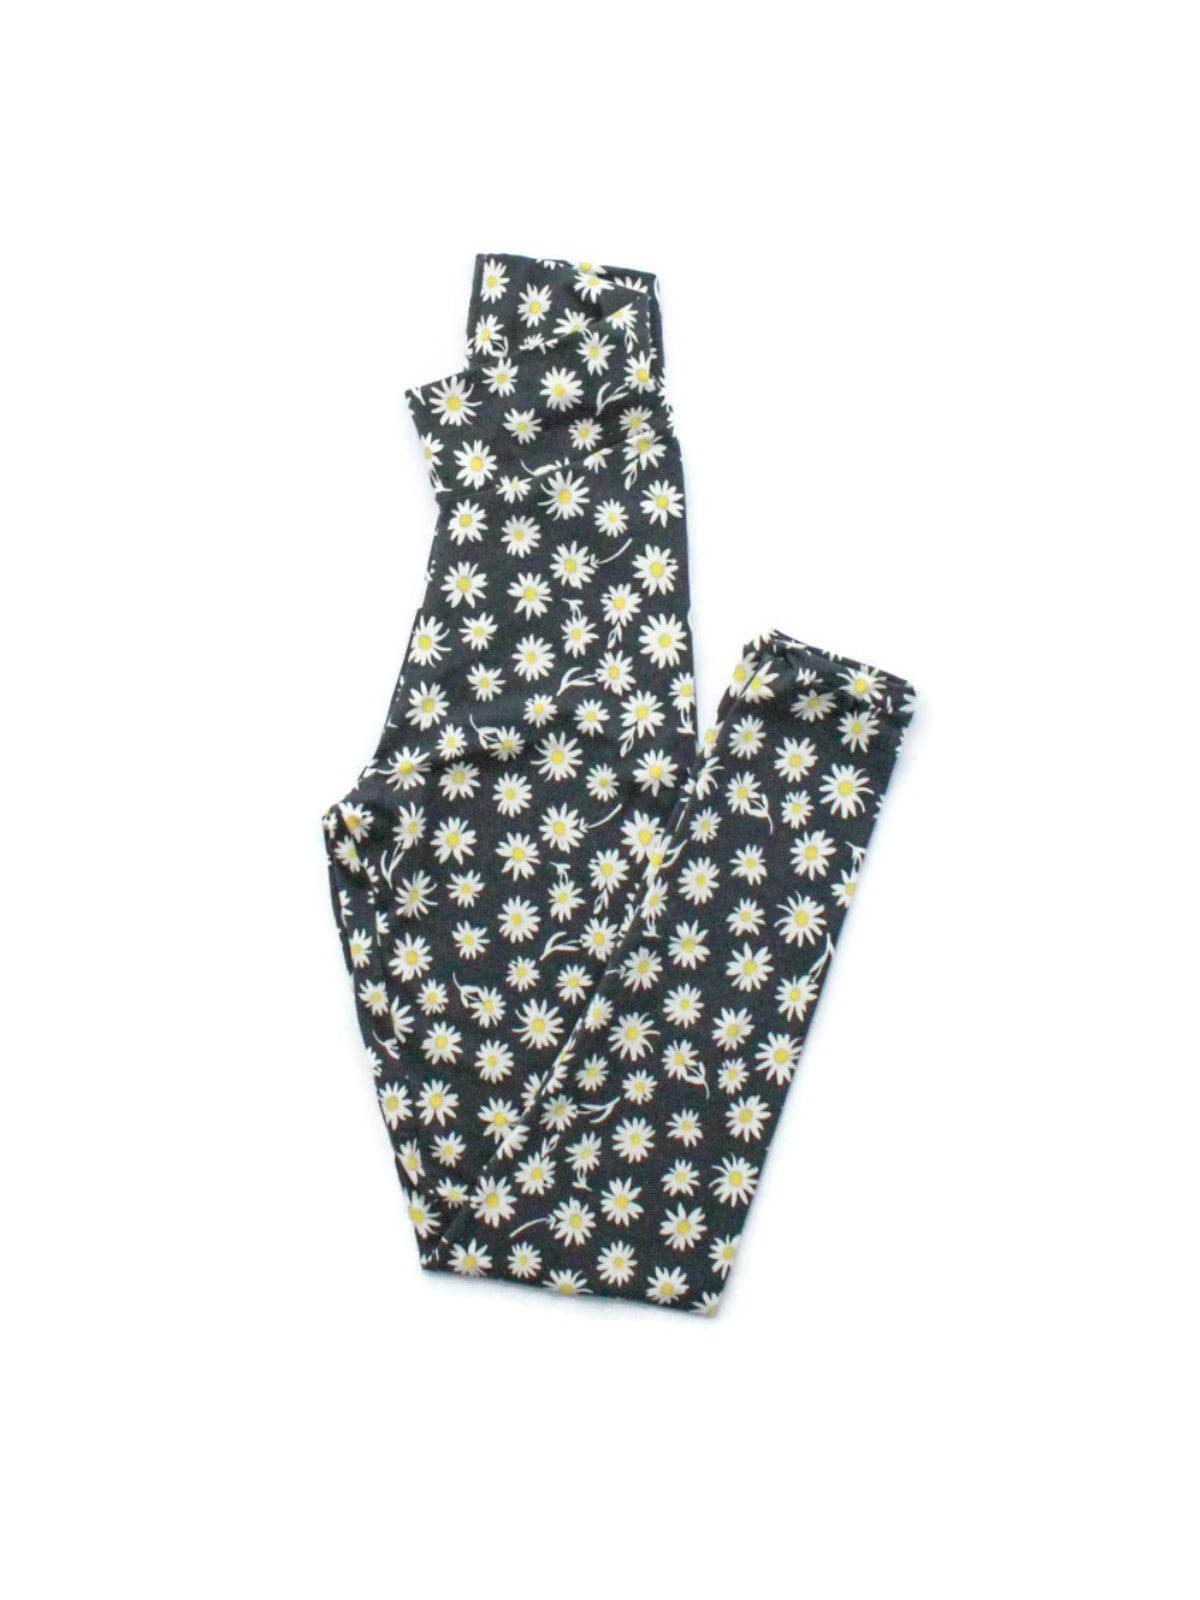 Lularoe One Size OS Paisley Daisy Floral Polka Dot Black White Yellow  Teepee Buttery Soft Womens Leggings fit Adult Sizes 2-10 OS-4358-BE at   Women's Clothing store